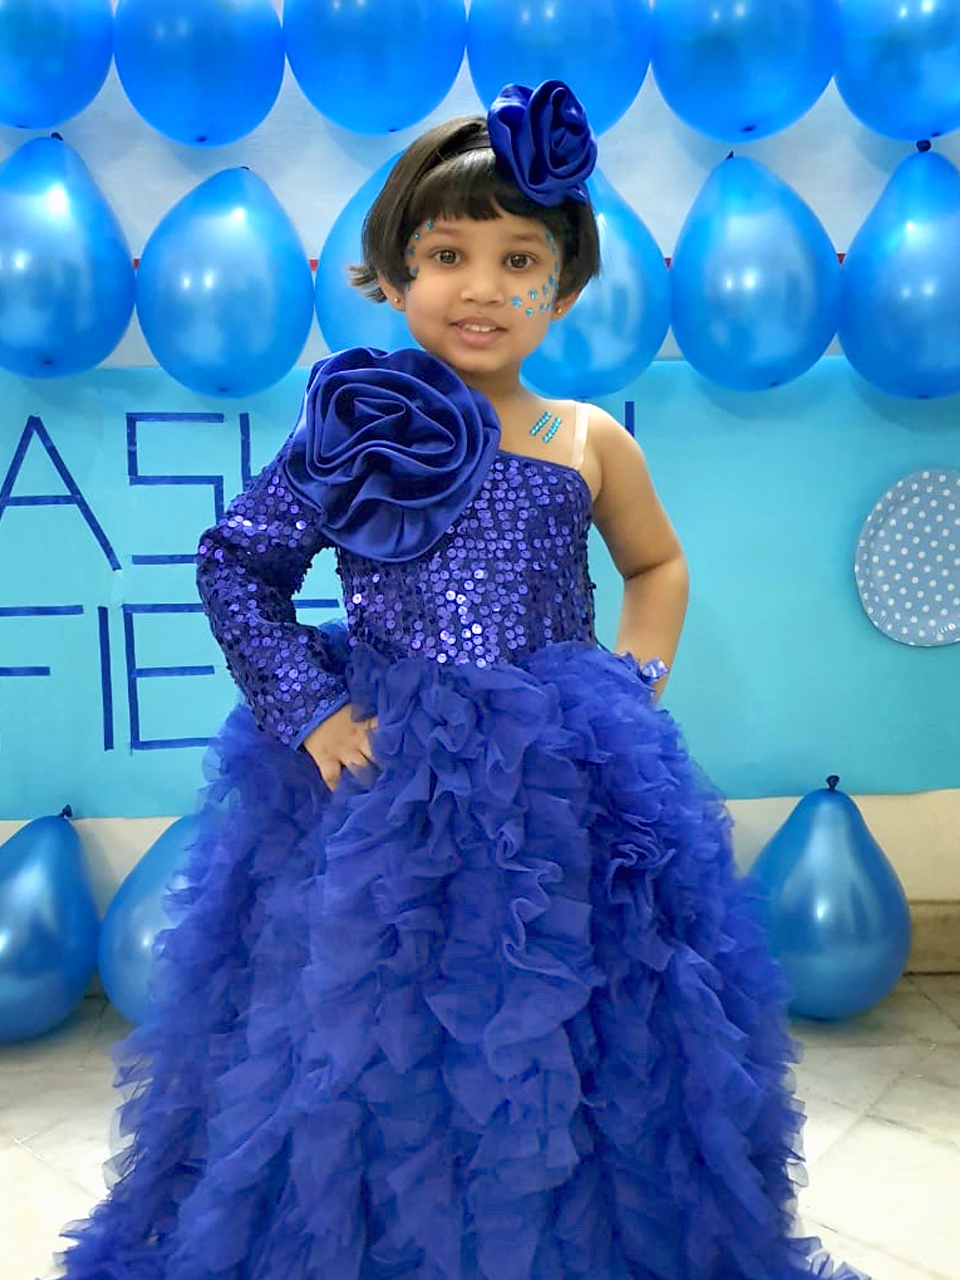 Mother's Pride » OUR TINY TRENDSETTERS ROCK THE RAMP WITH UNIQUE DASH ...